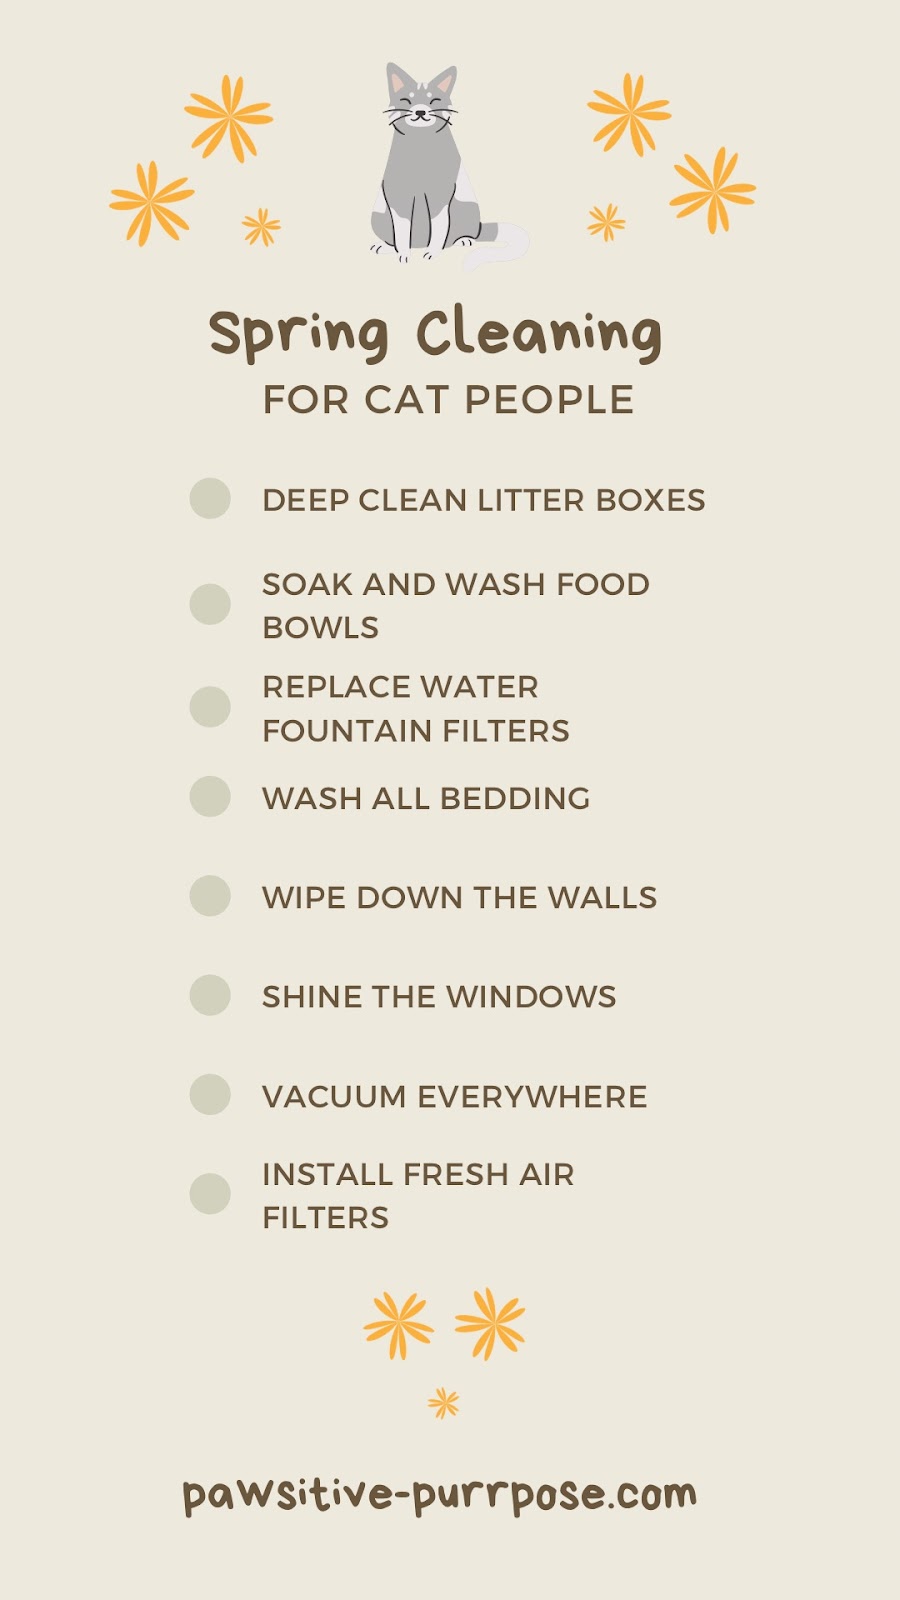 Checklist for spring cleaning for cat people